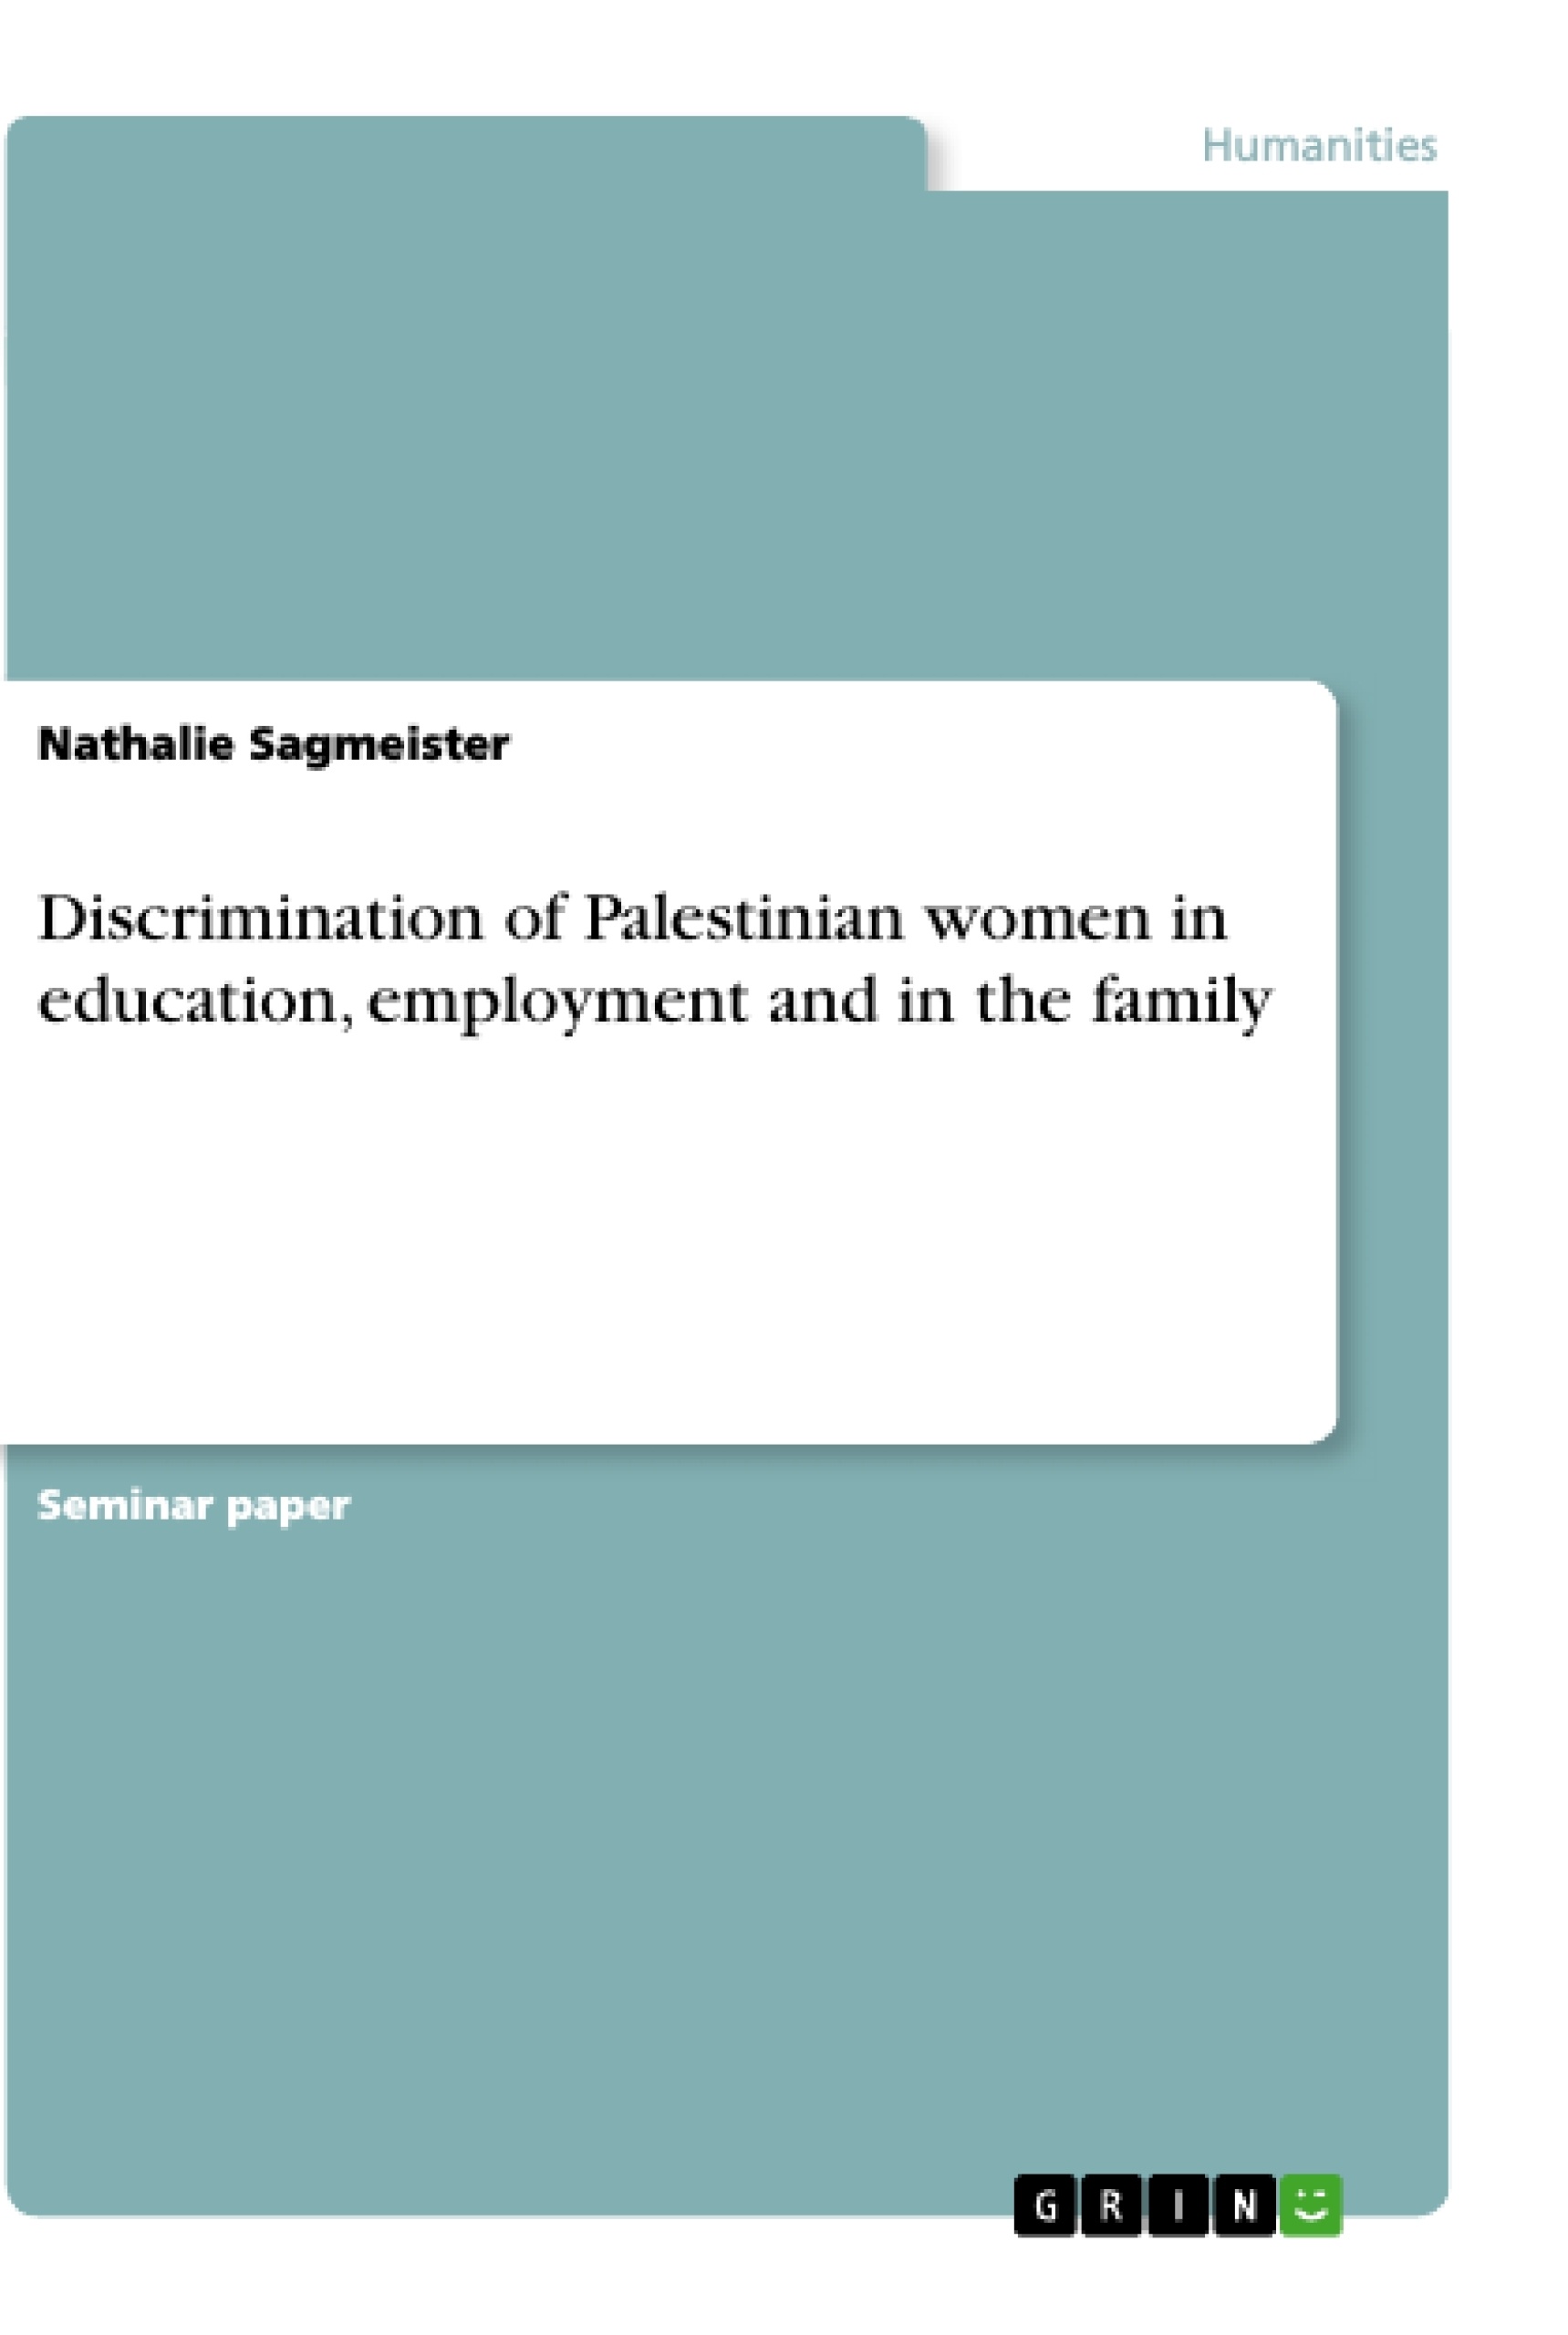 Título: Discrimination of Palestinian women in education, employment and in the family